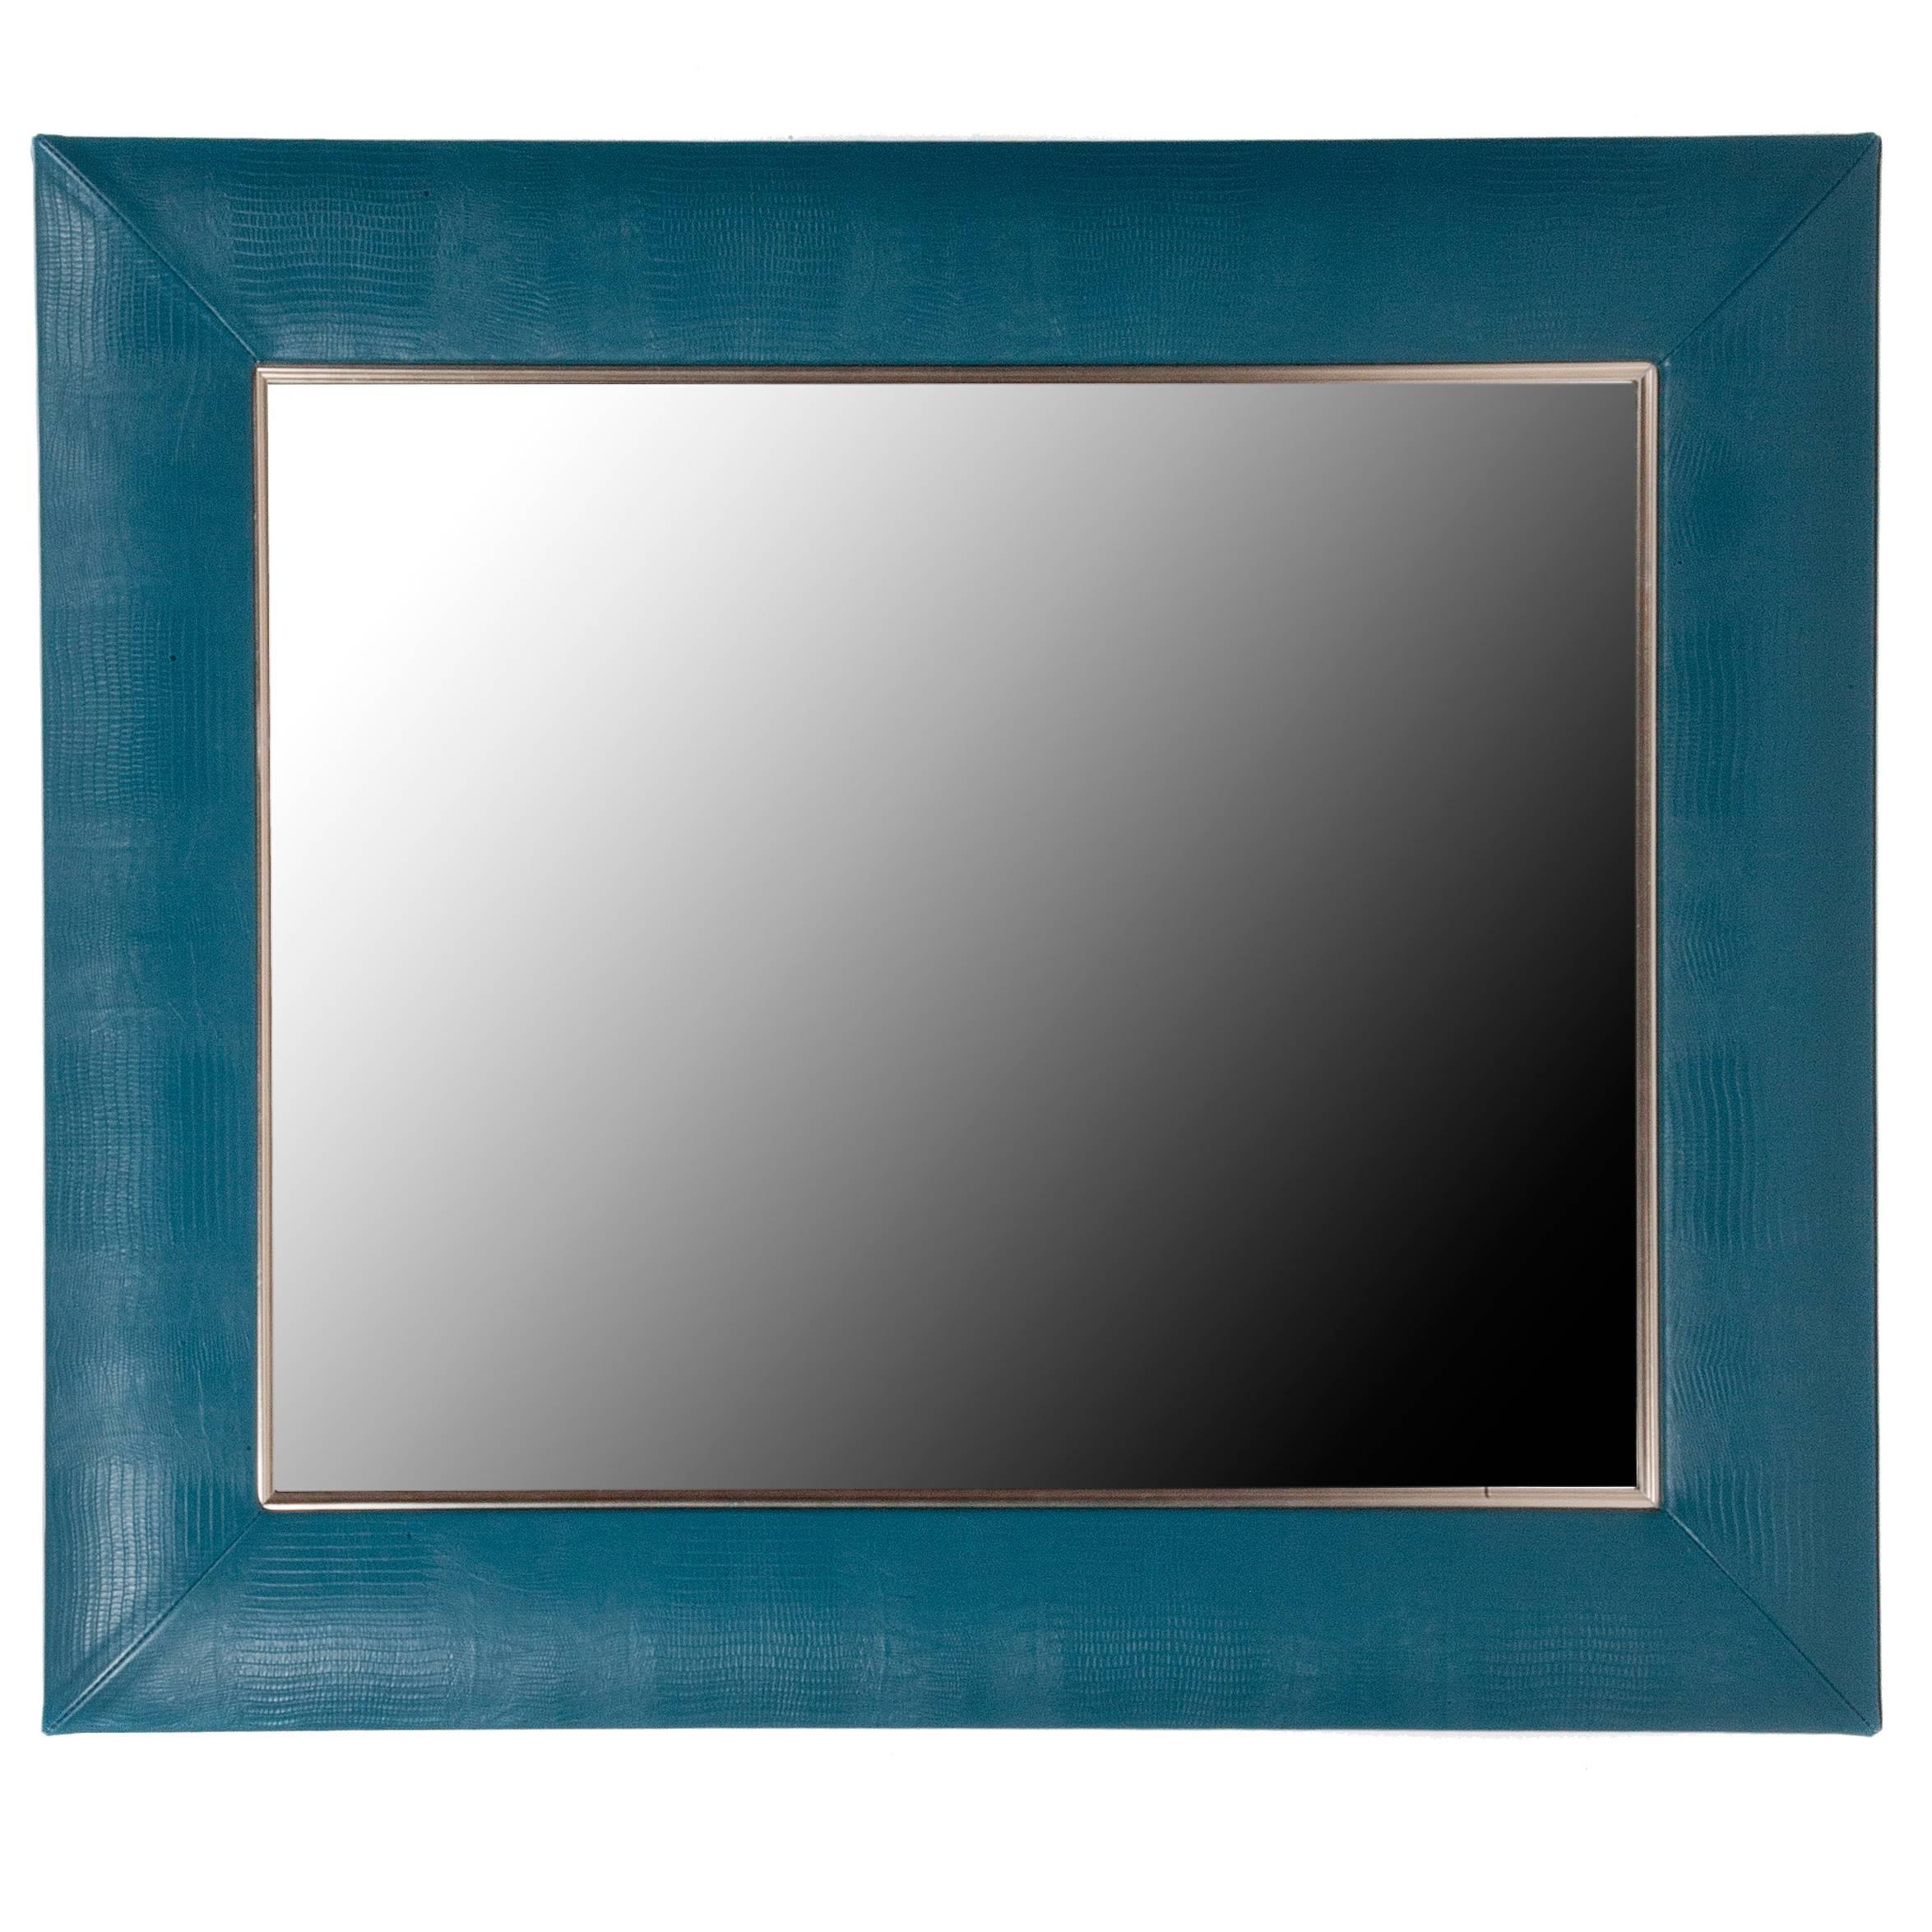 Teal Lizard Embossed Leather Framed Mirror with Gold Detailing